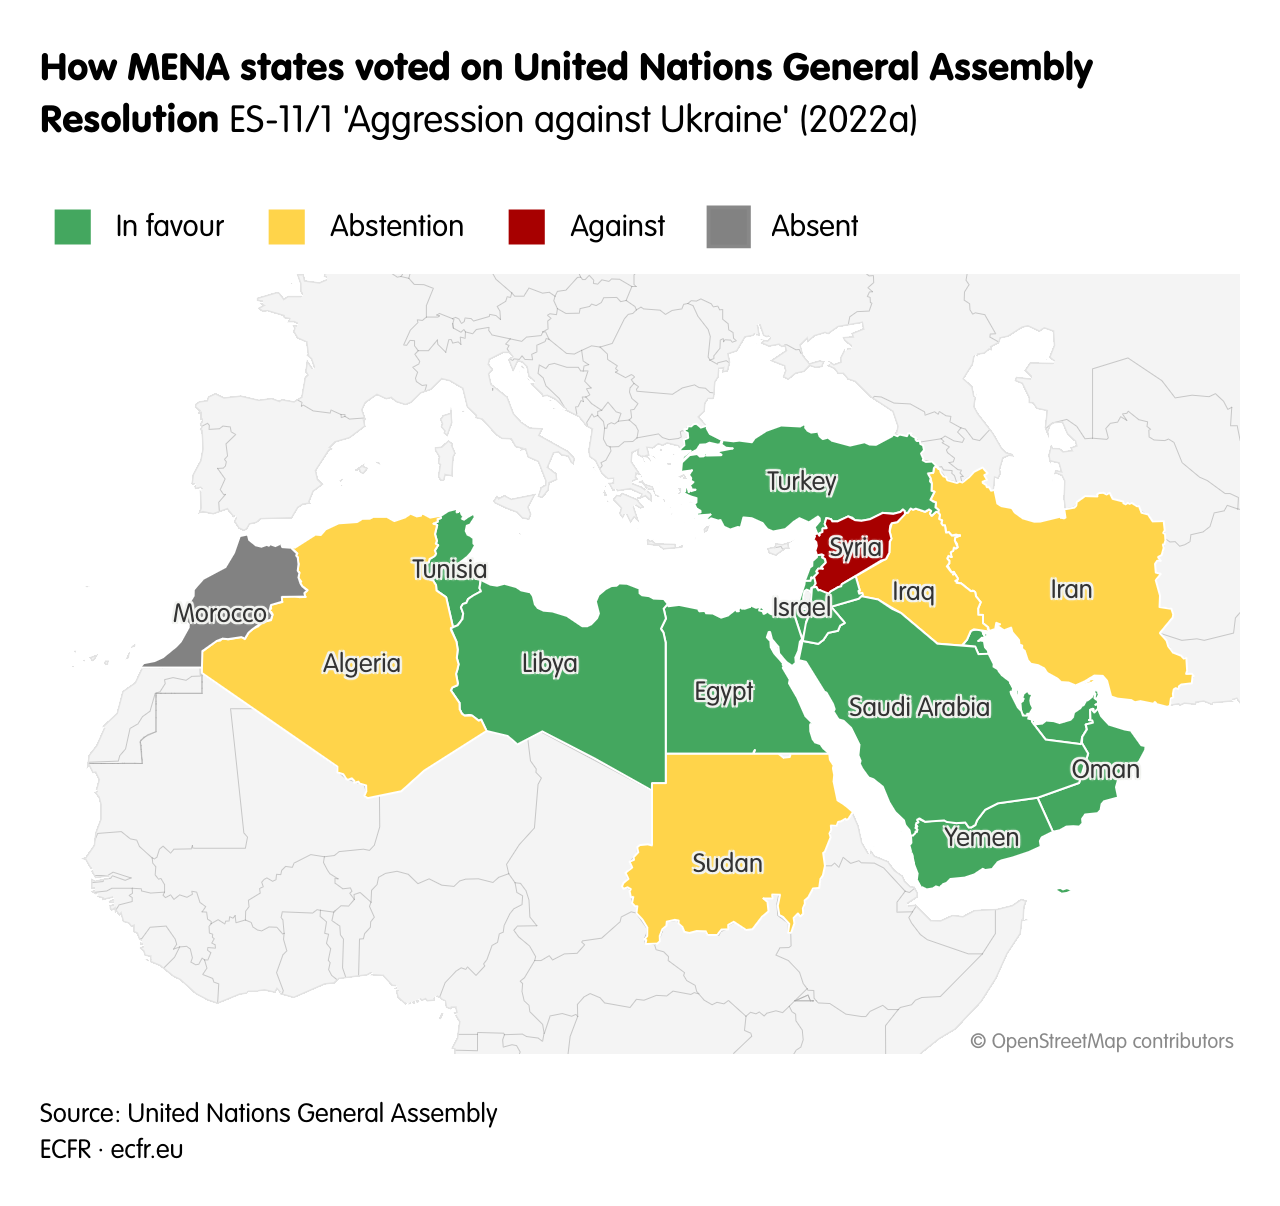 How MENA states voted on United Nations General Assembly Resolution 